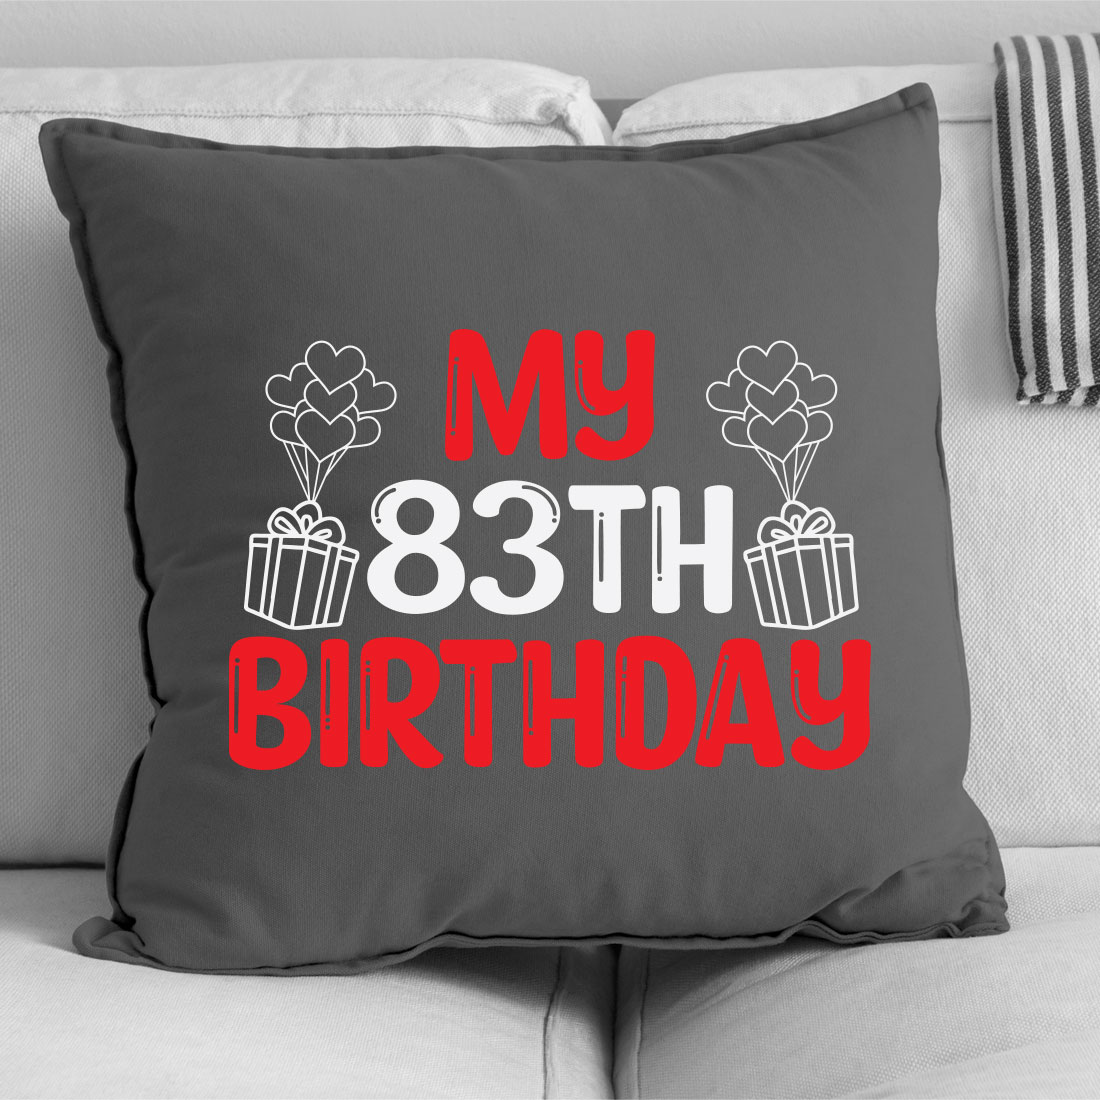 Pillow that says my 33rd birthday on it.